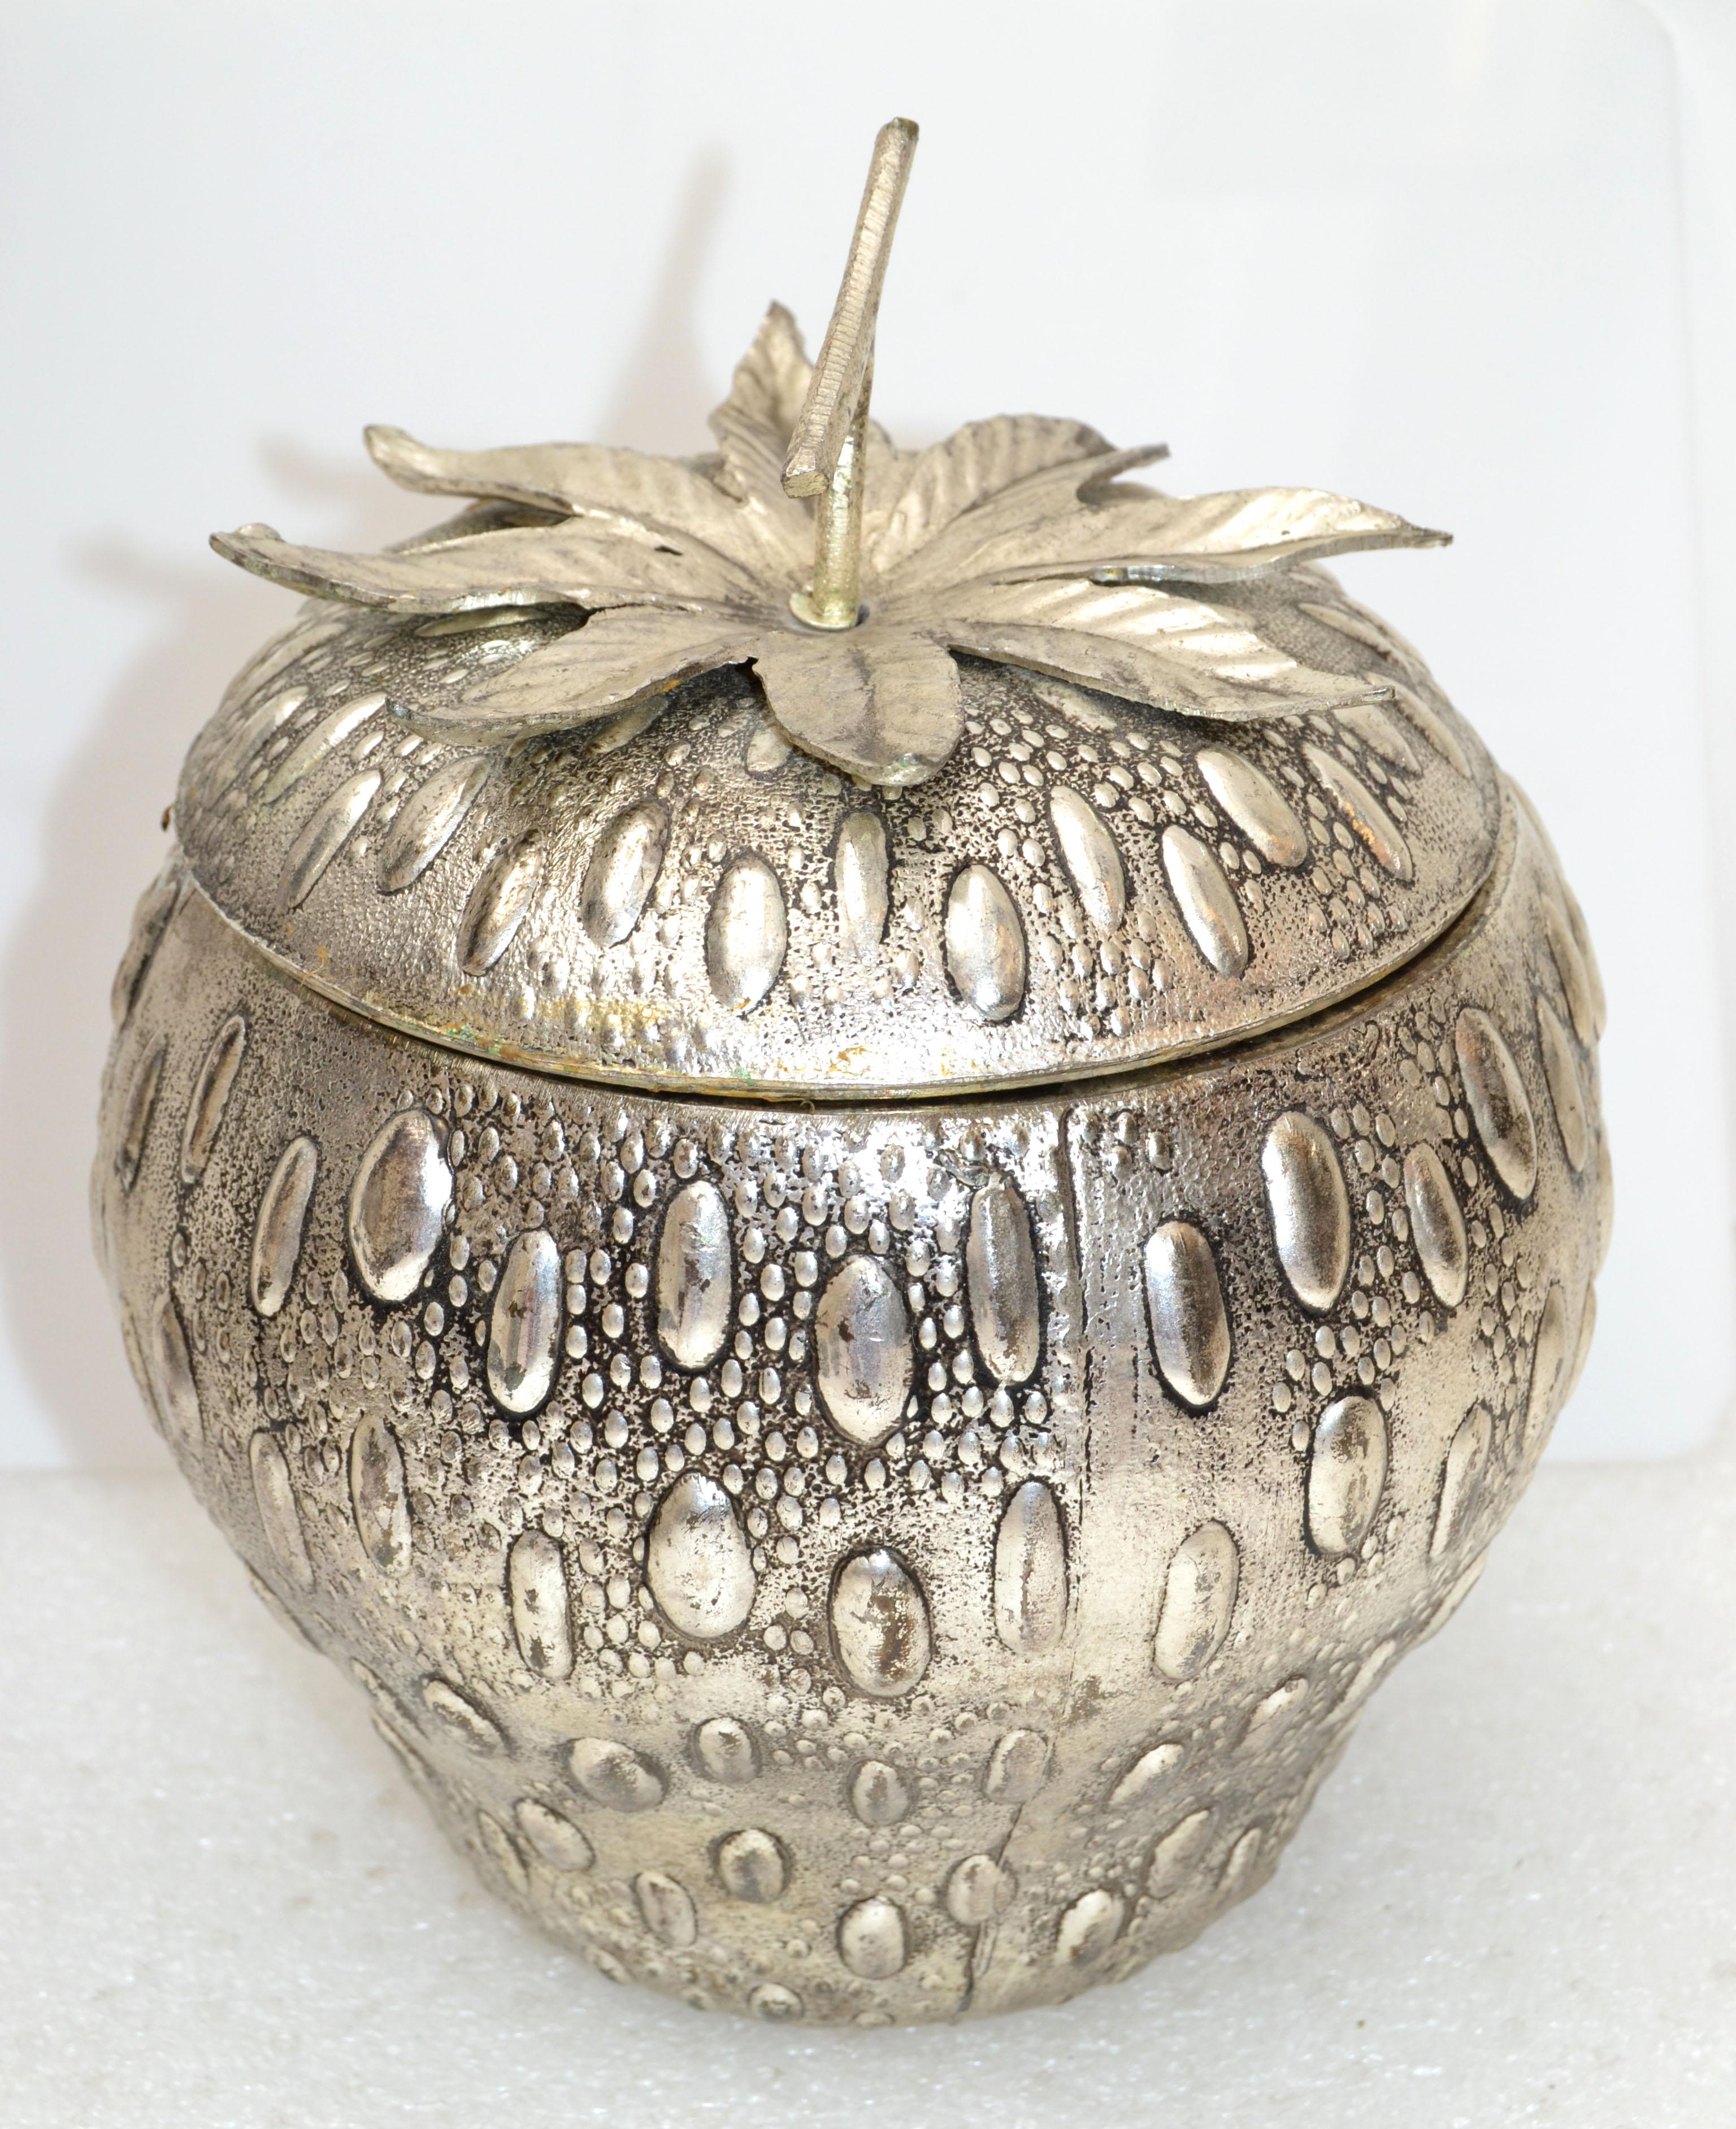 Metal Mauro Manetti Strawberry Silver Plate Ice Bucket Mid-Century Modern, Italy 1960 For Sale